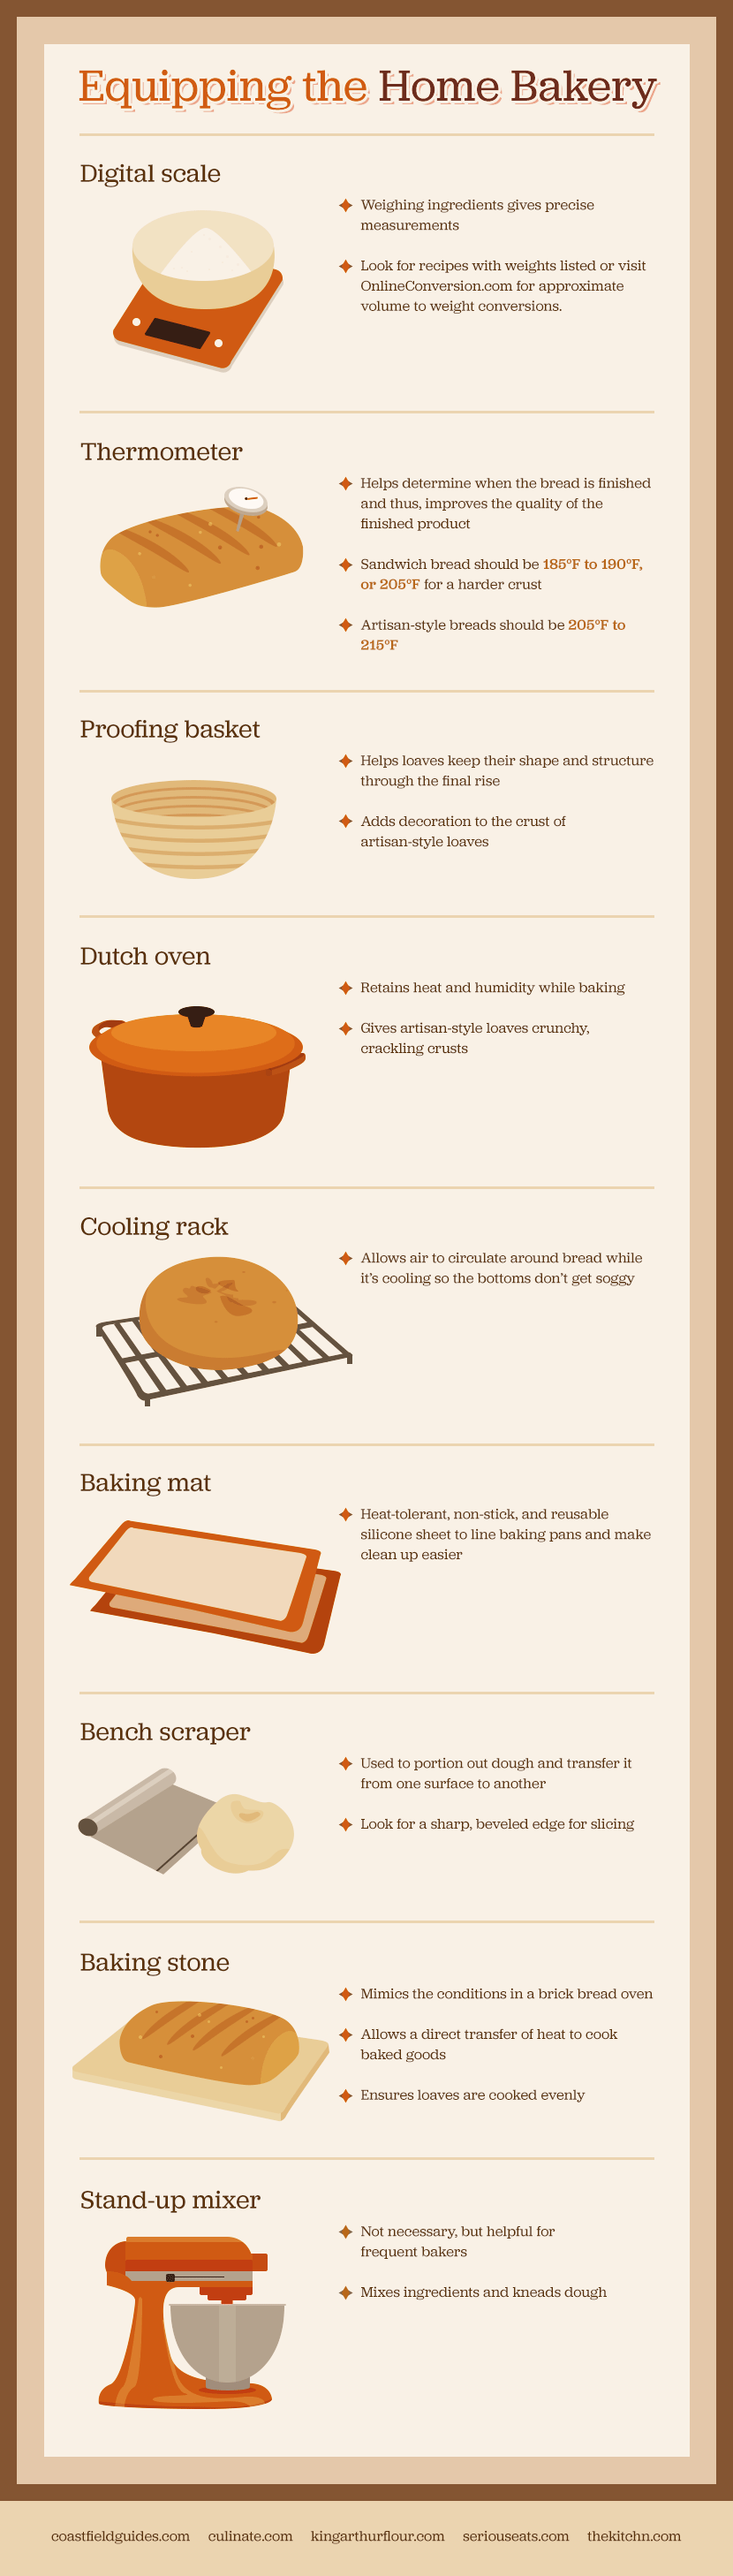 10 Tips for Baking Bread at Home - ImaginAcres